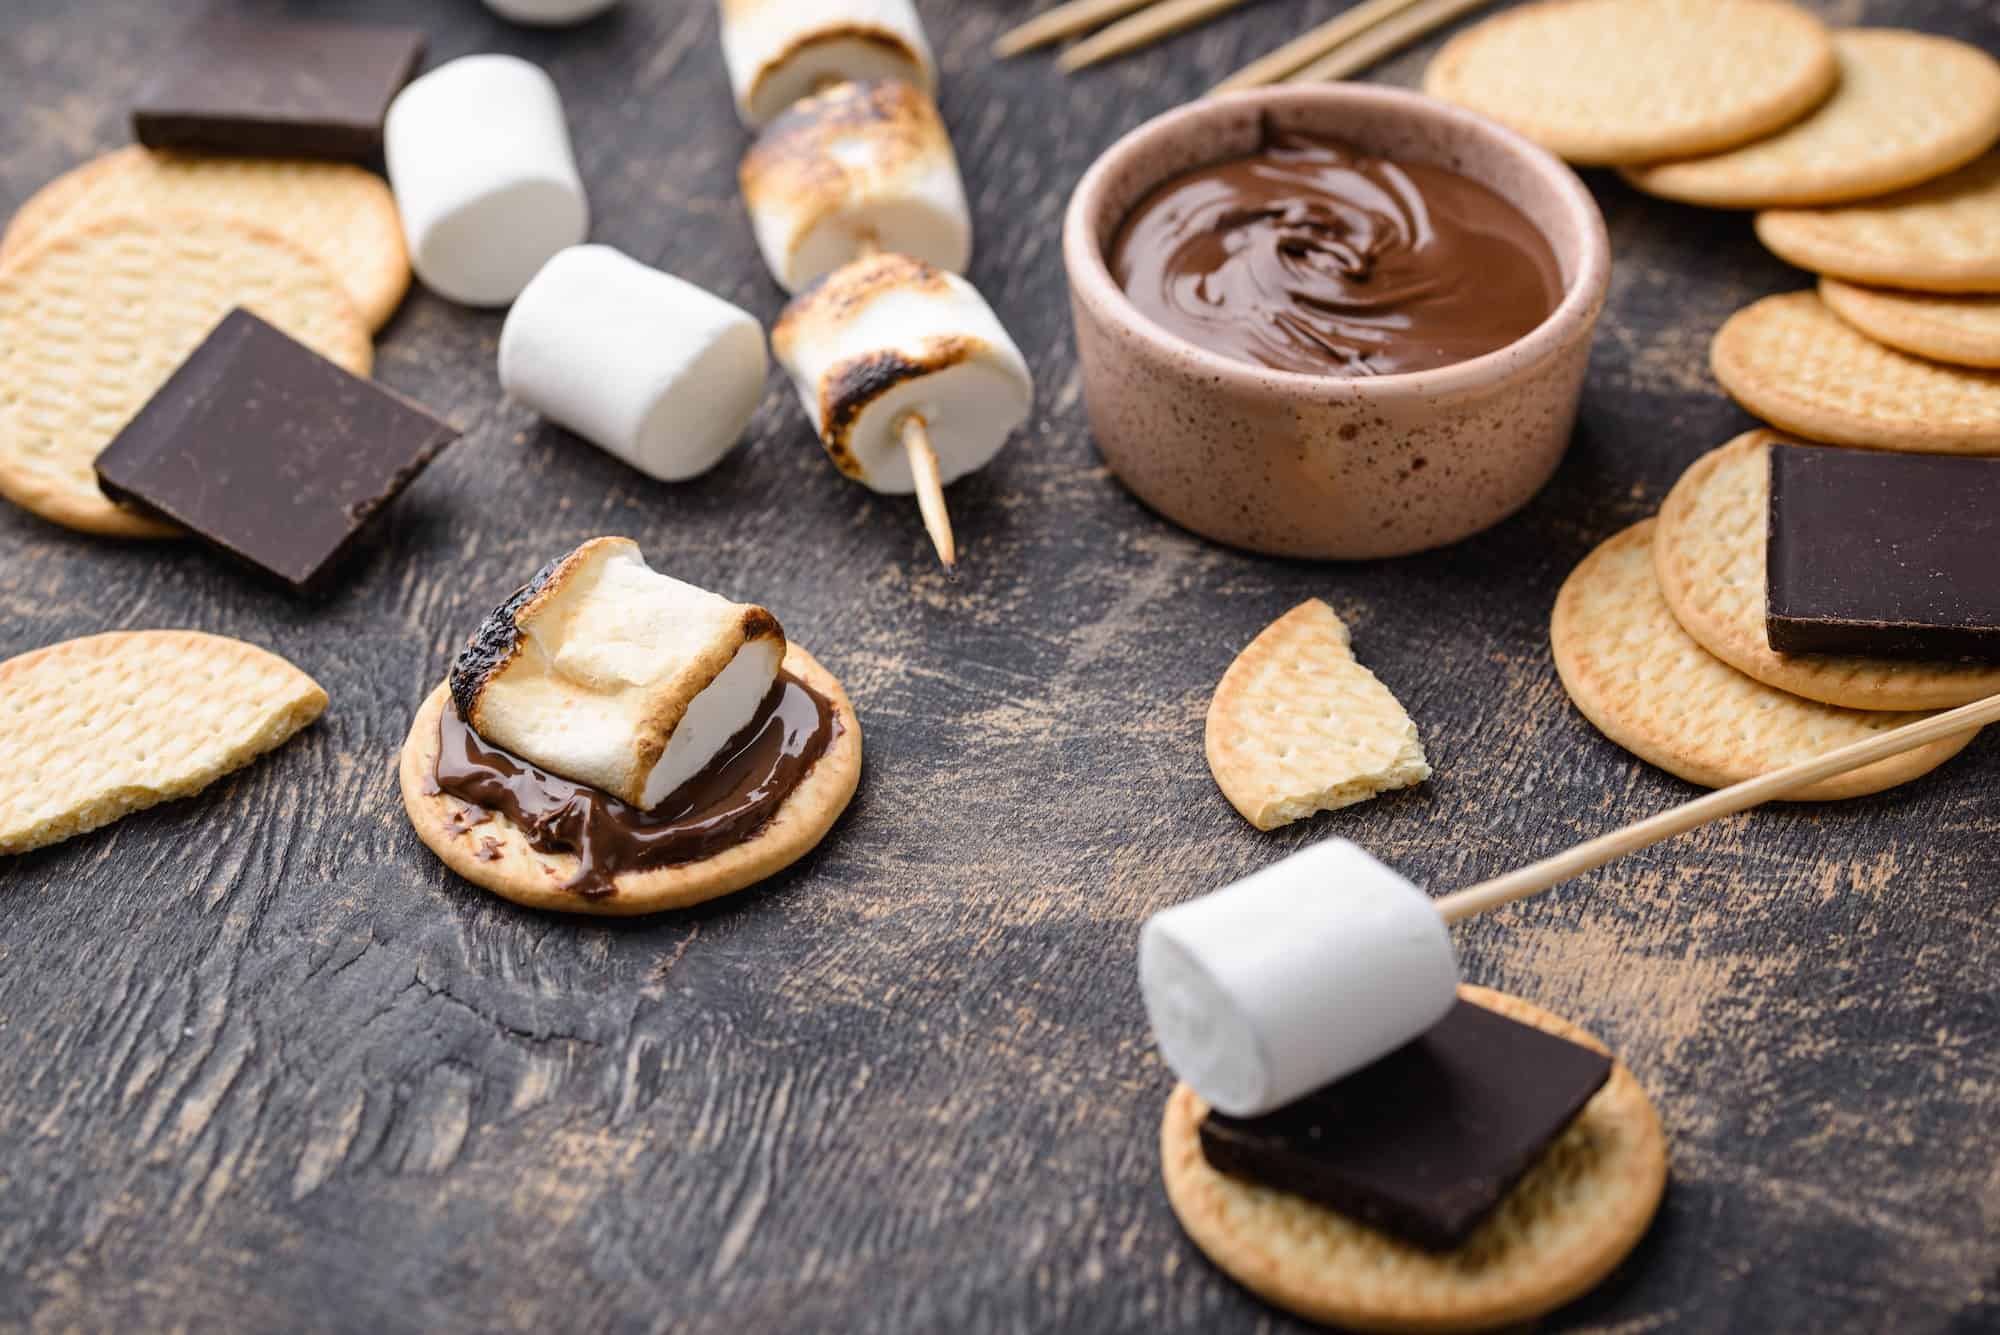 Smores with marshmallow, chocolate and crackers